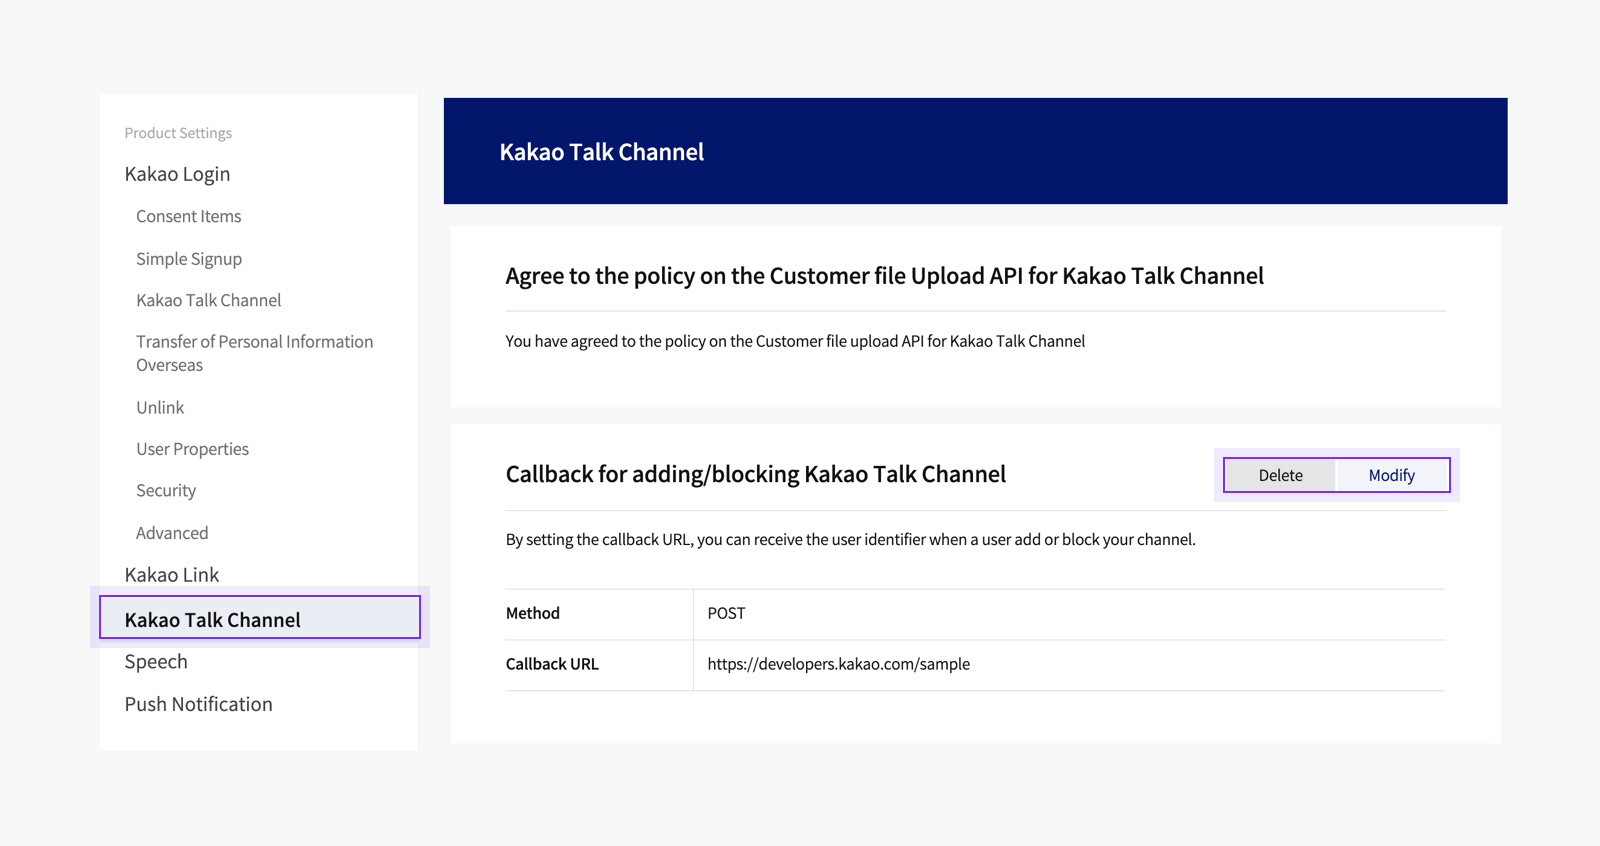 Kakao Talk Channel page for callback settings